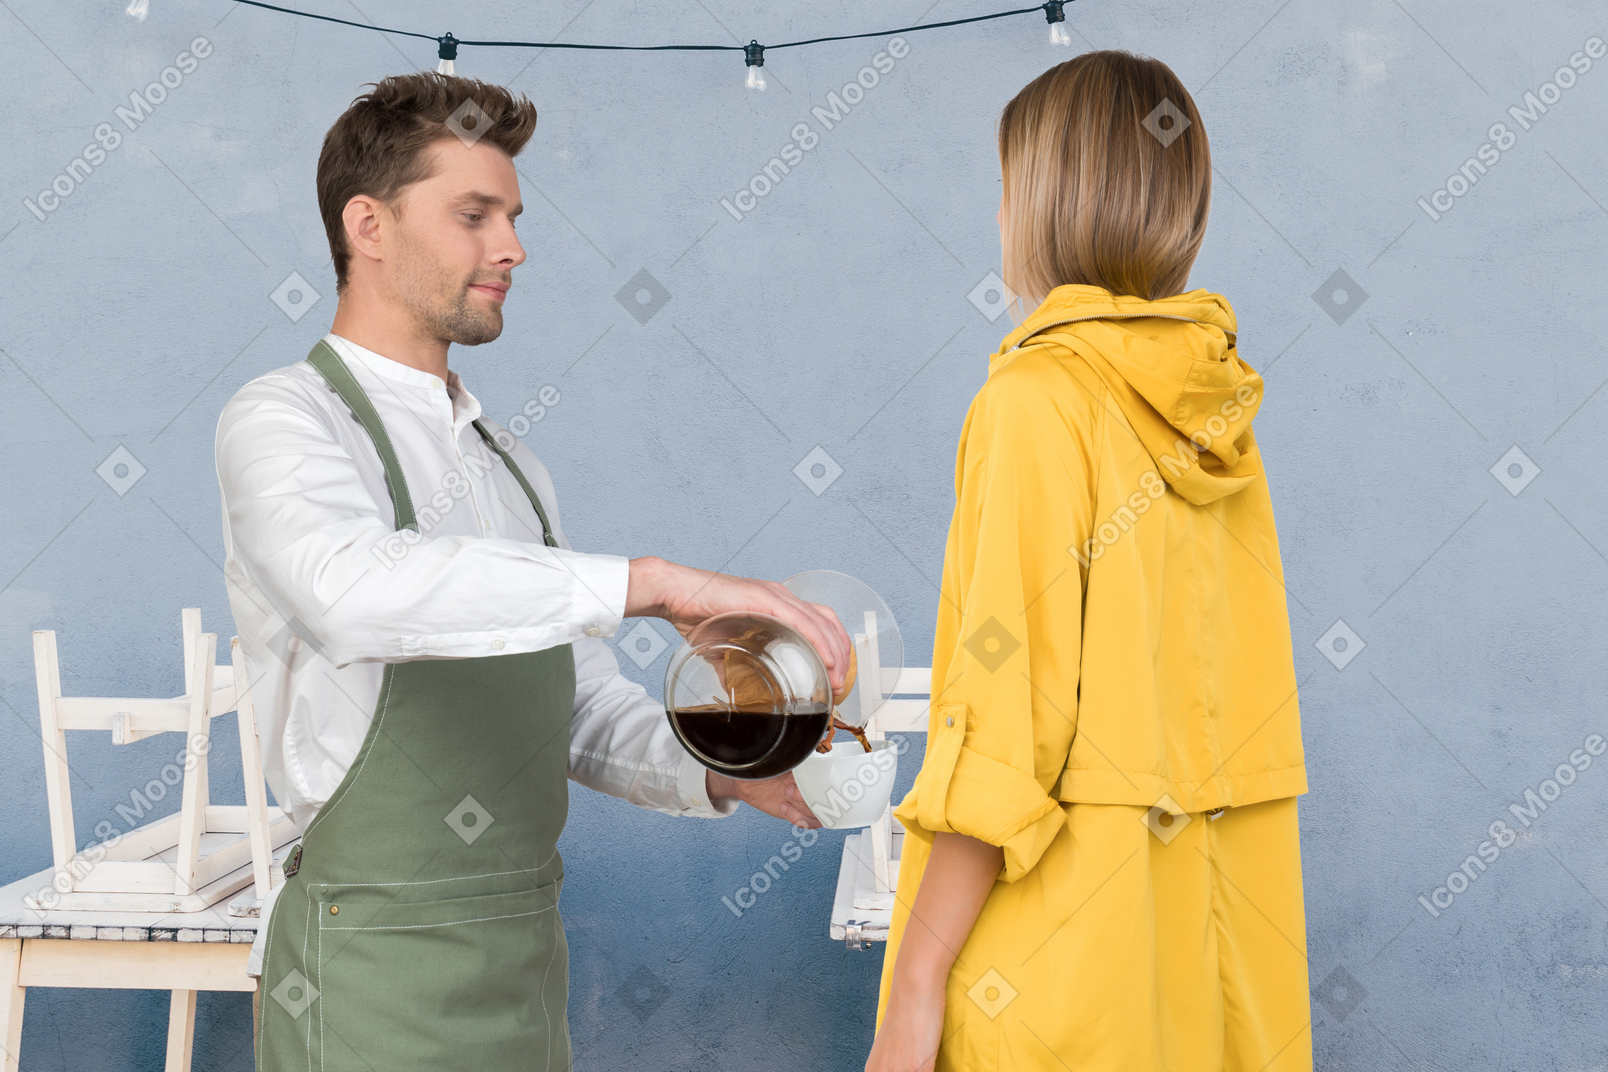 A man pouring a cup of coffee to a woman